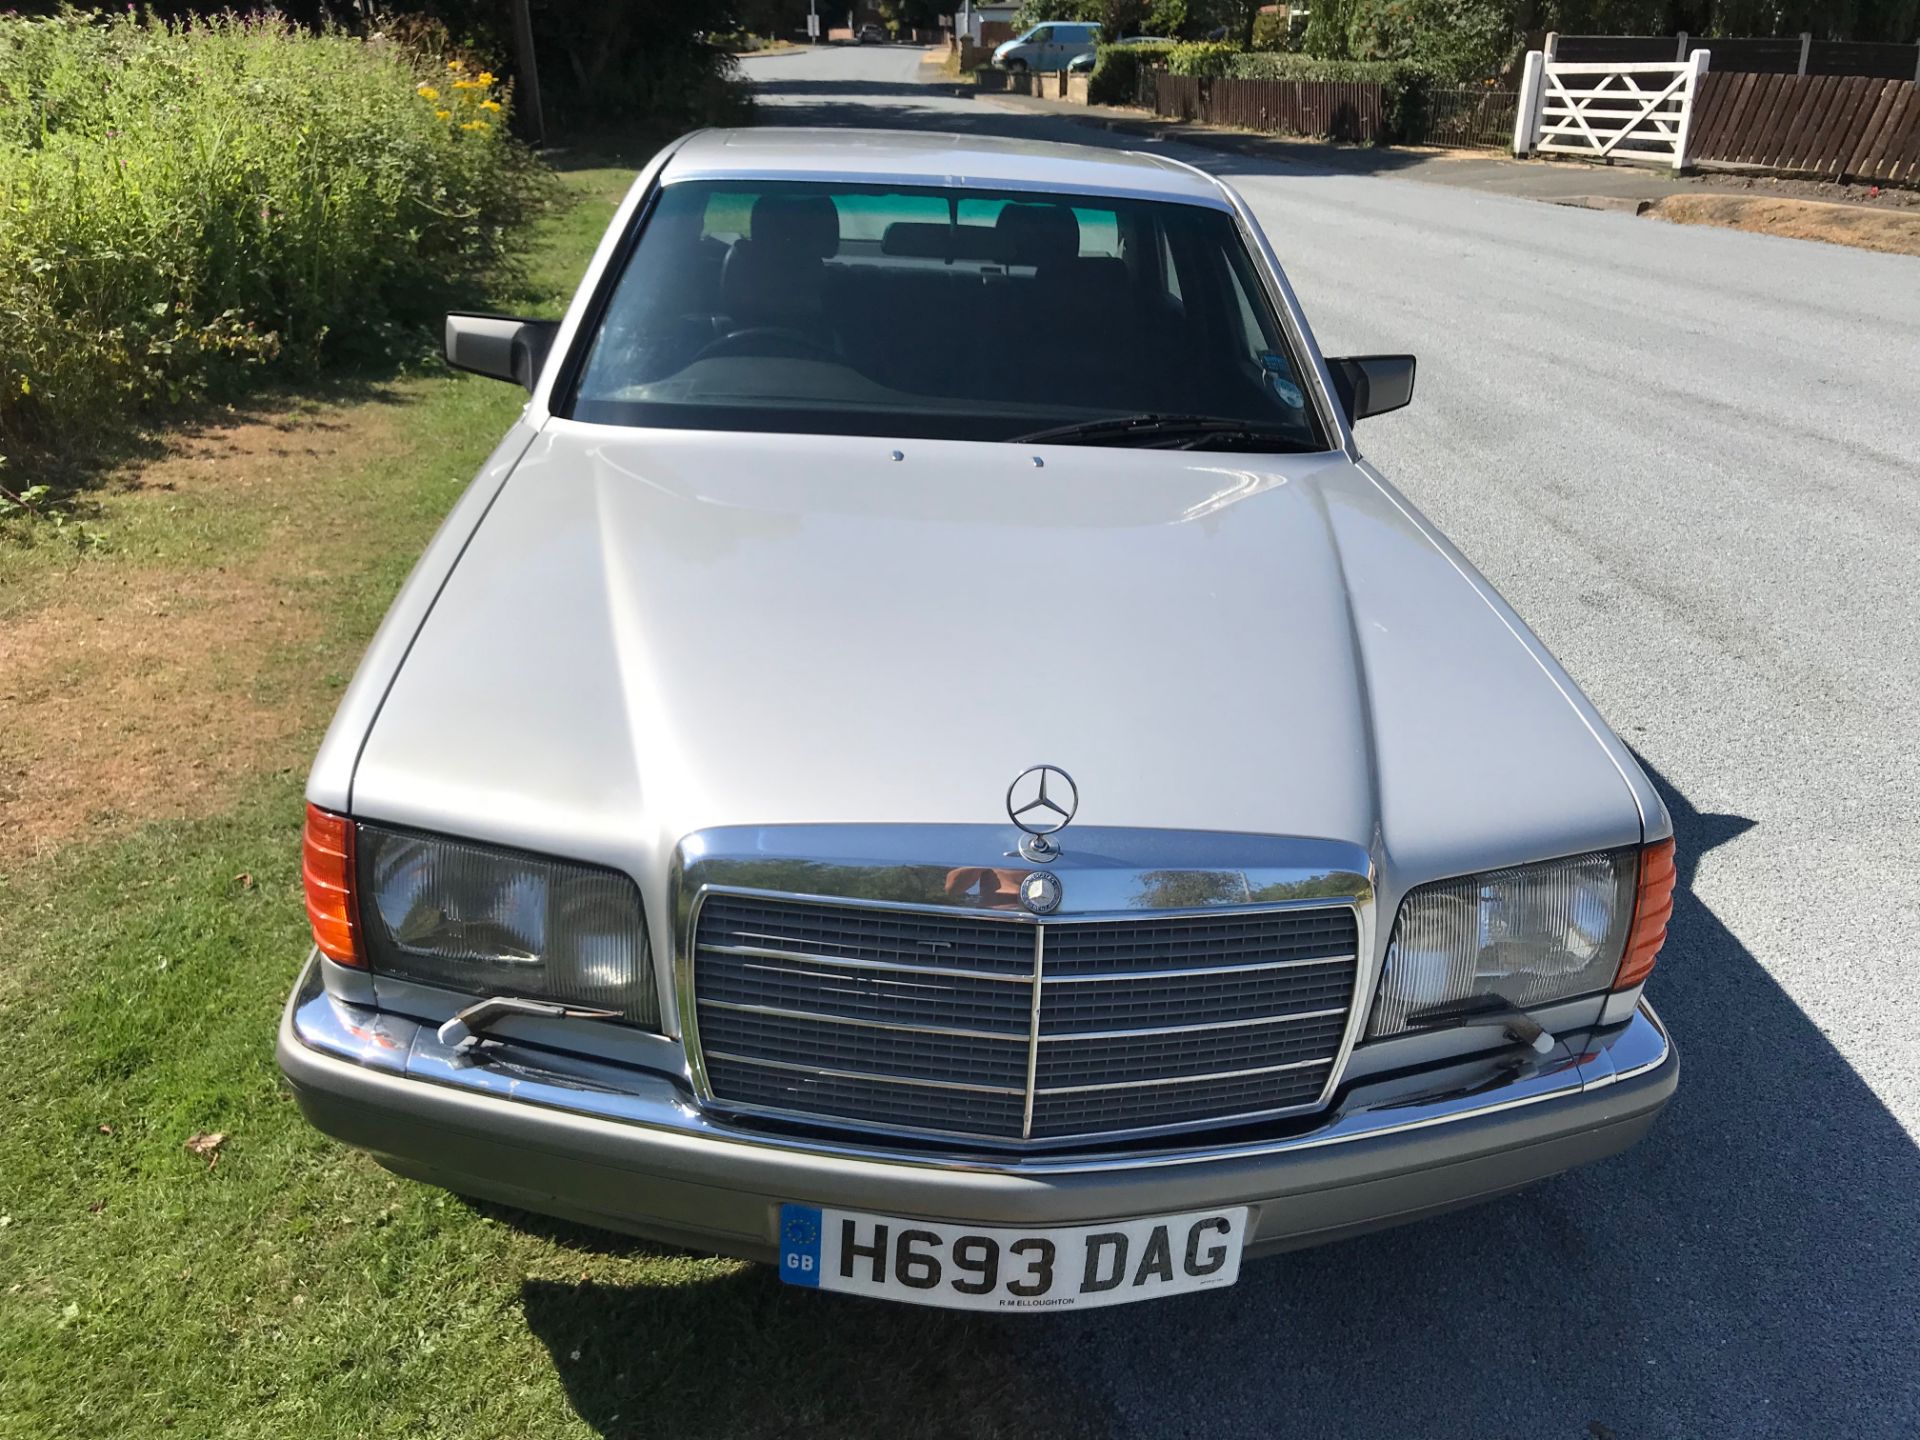 Mercedes 300 SE Automatic - Image 67 of 69